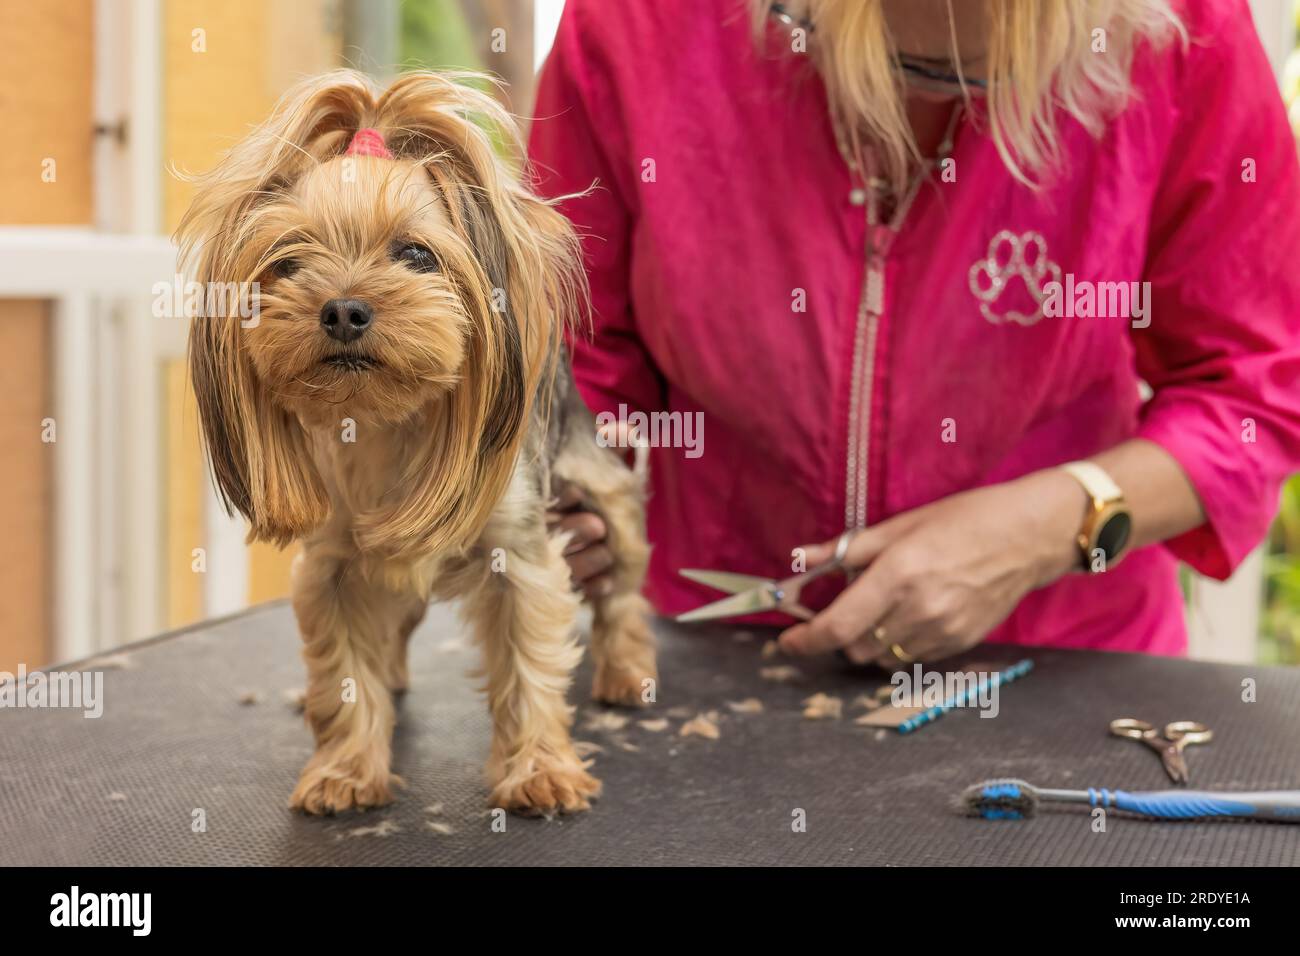 Trimming the hind legs of Yorkshire terrier by proffessional groomer. Stock Photo